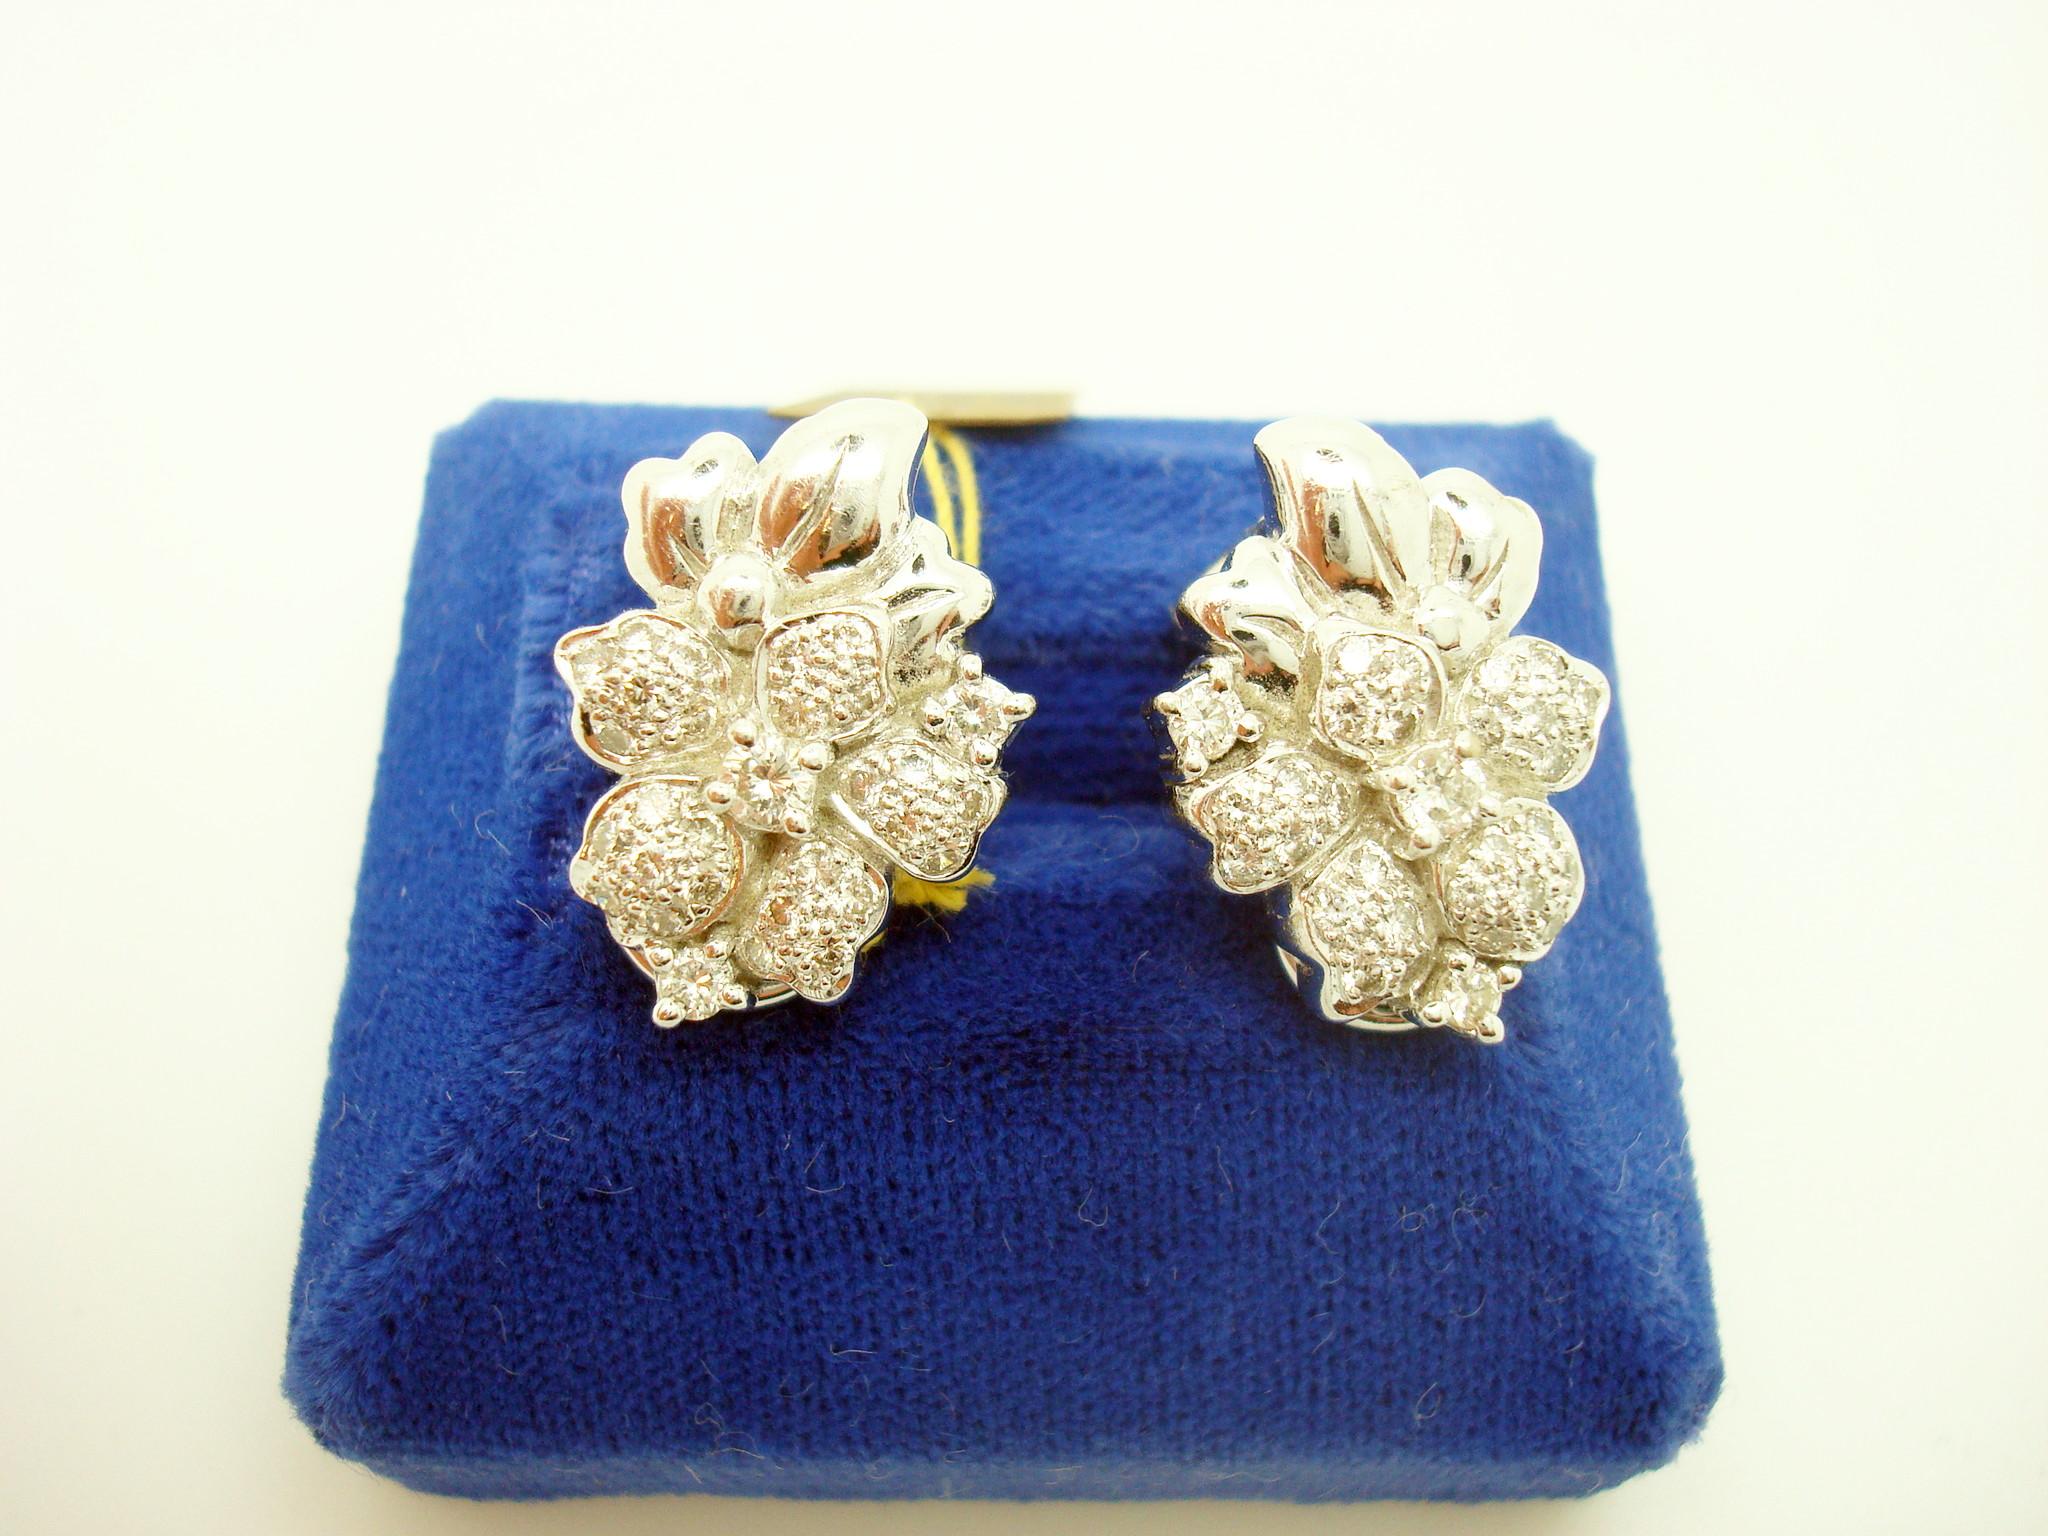 18k White Gold Genuine Natural Diamond Flower Earrings 1.2 Carats (#J1779)

18k white gold diamond earrings in the form of a flower featuring 1.2 carats of round brilliant cut diamonds. The three larger diamonds are prong set, and the surrounding